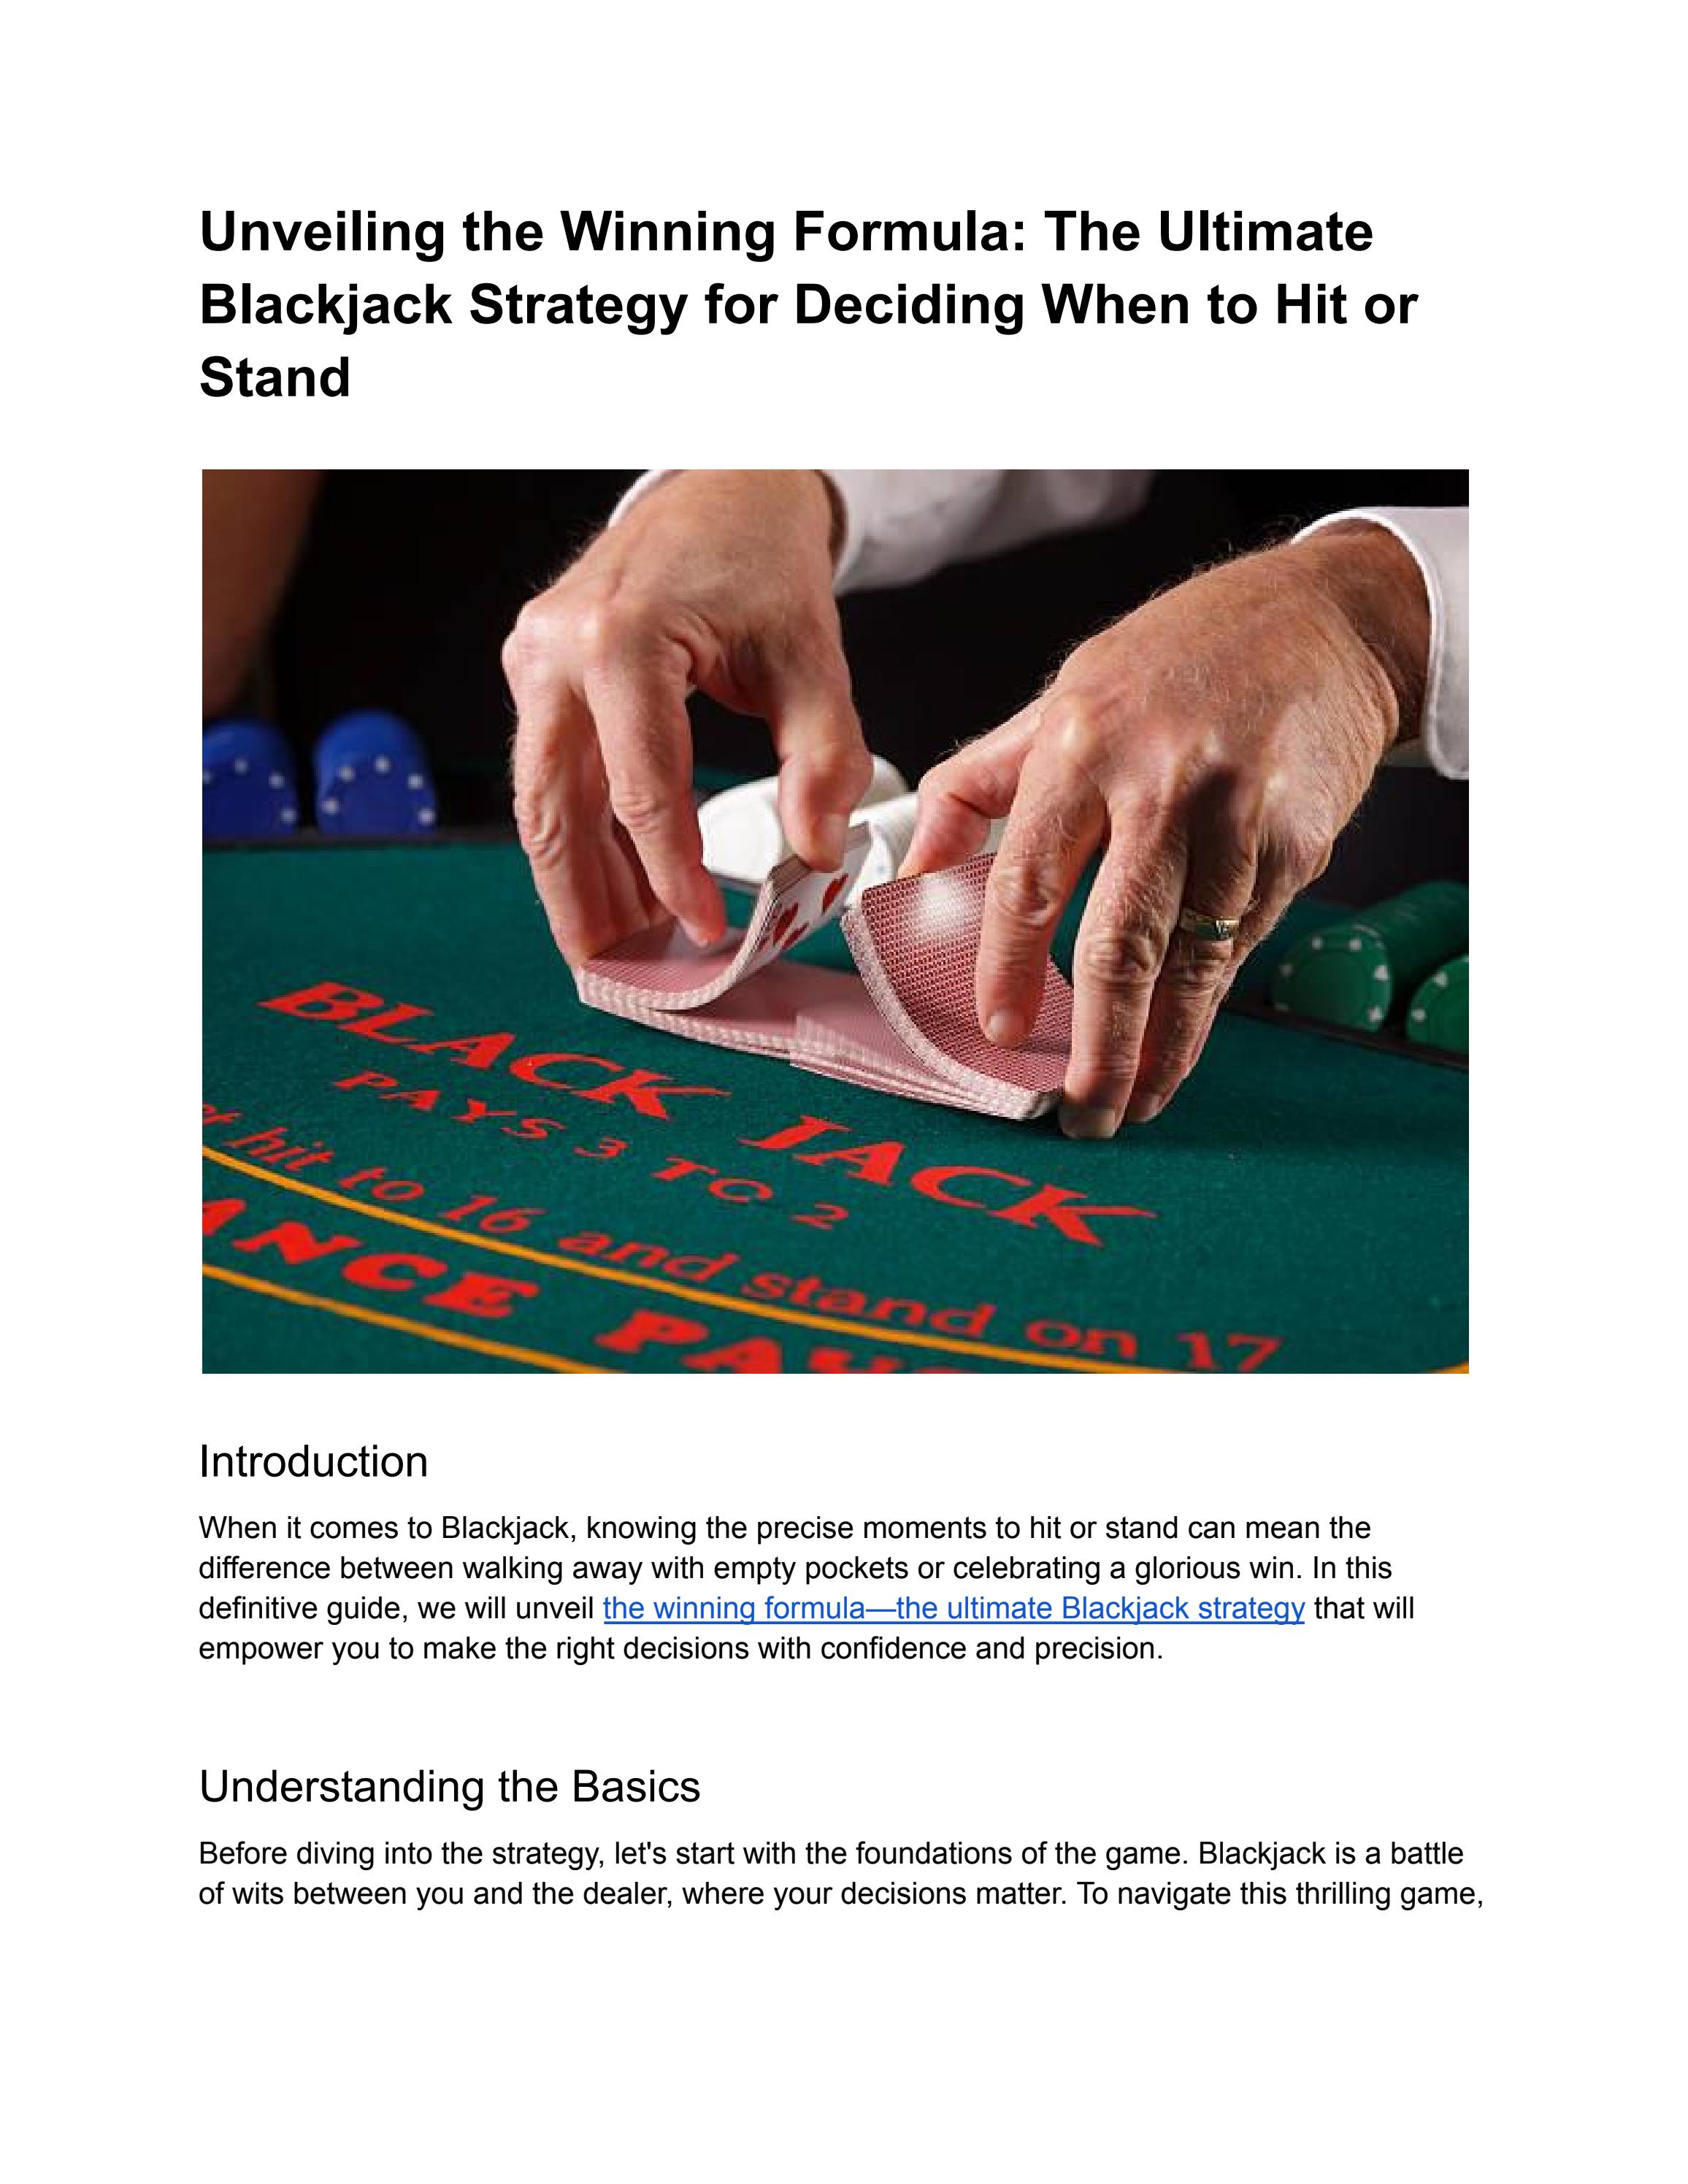 Hit or Stand: The Ultimate Blackjack Dilemma